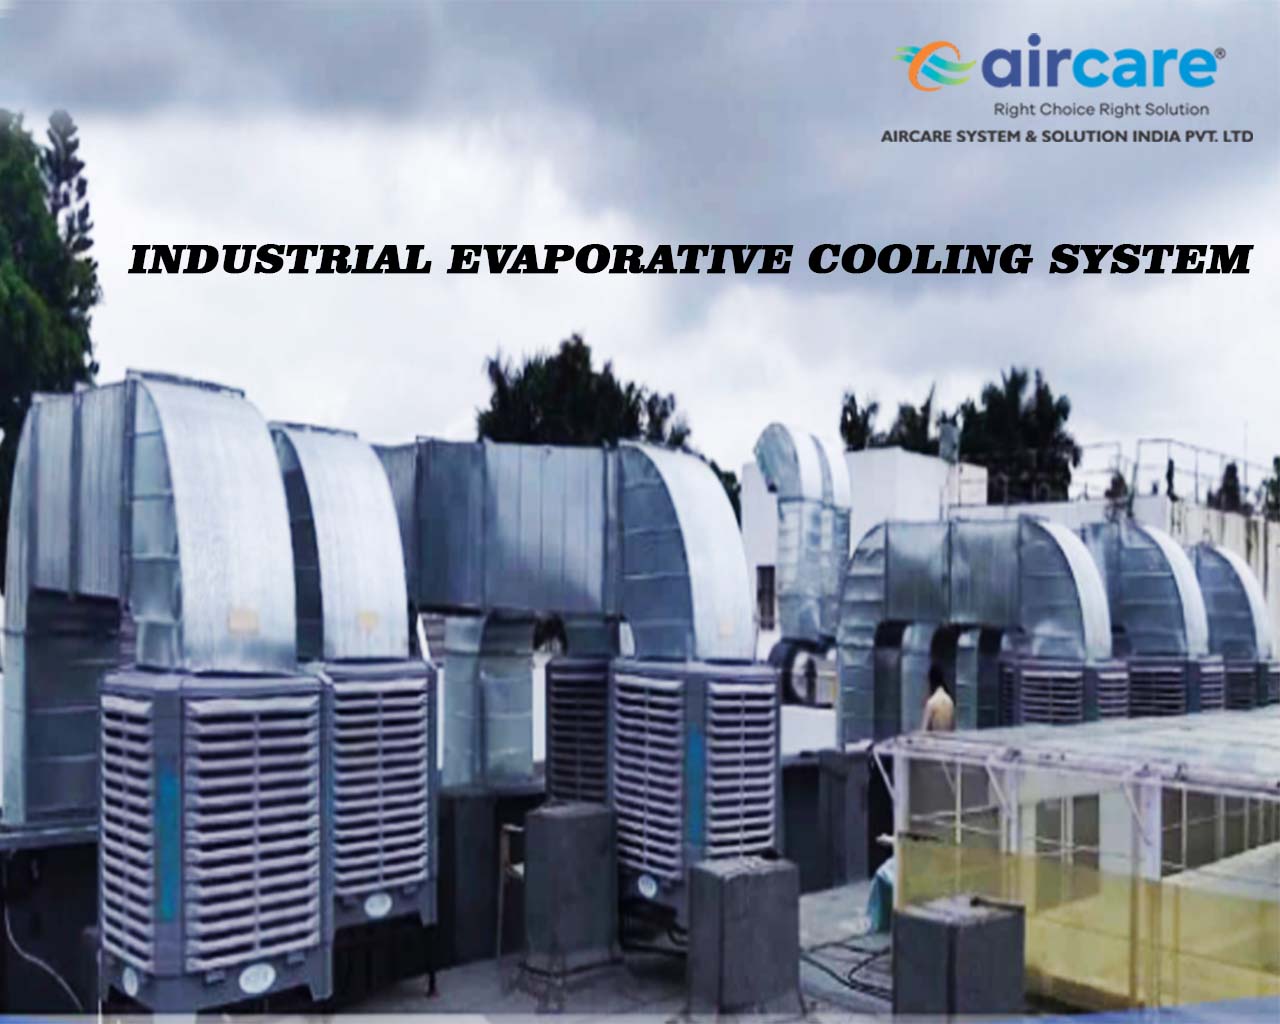 Industrial Evaporative Cooling System | Industrial Evaporative Cooling System supplier, Manufacturer in Pune, India